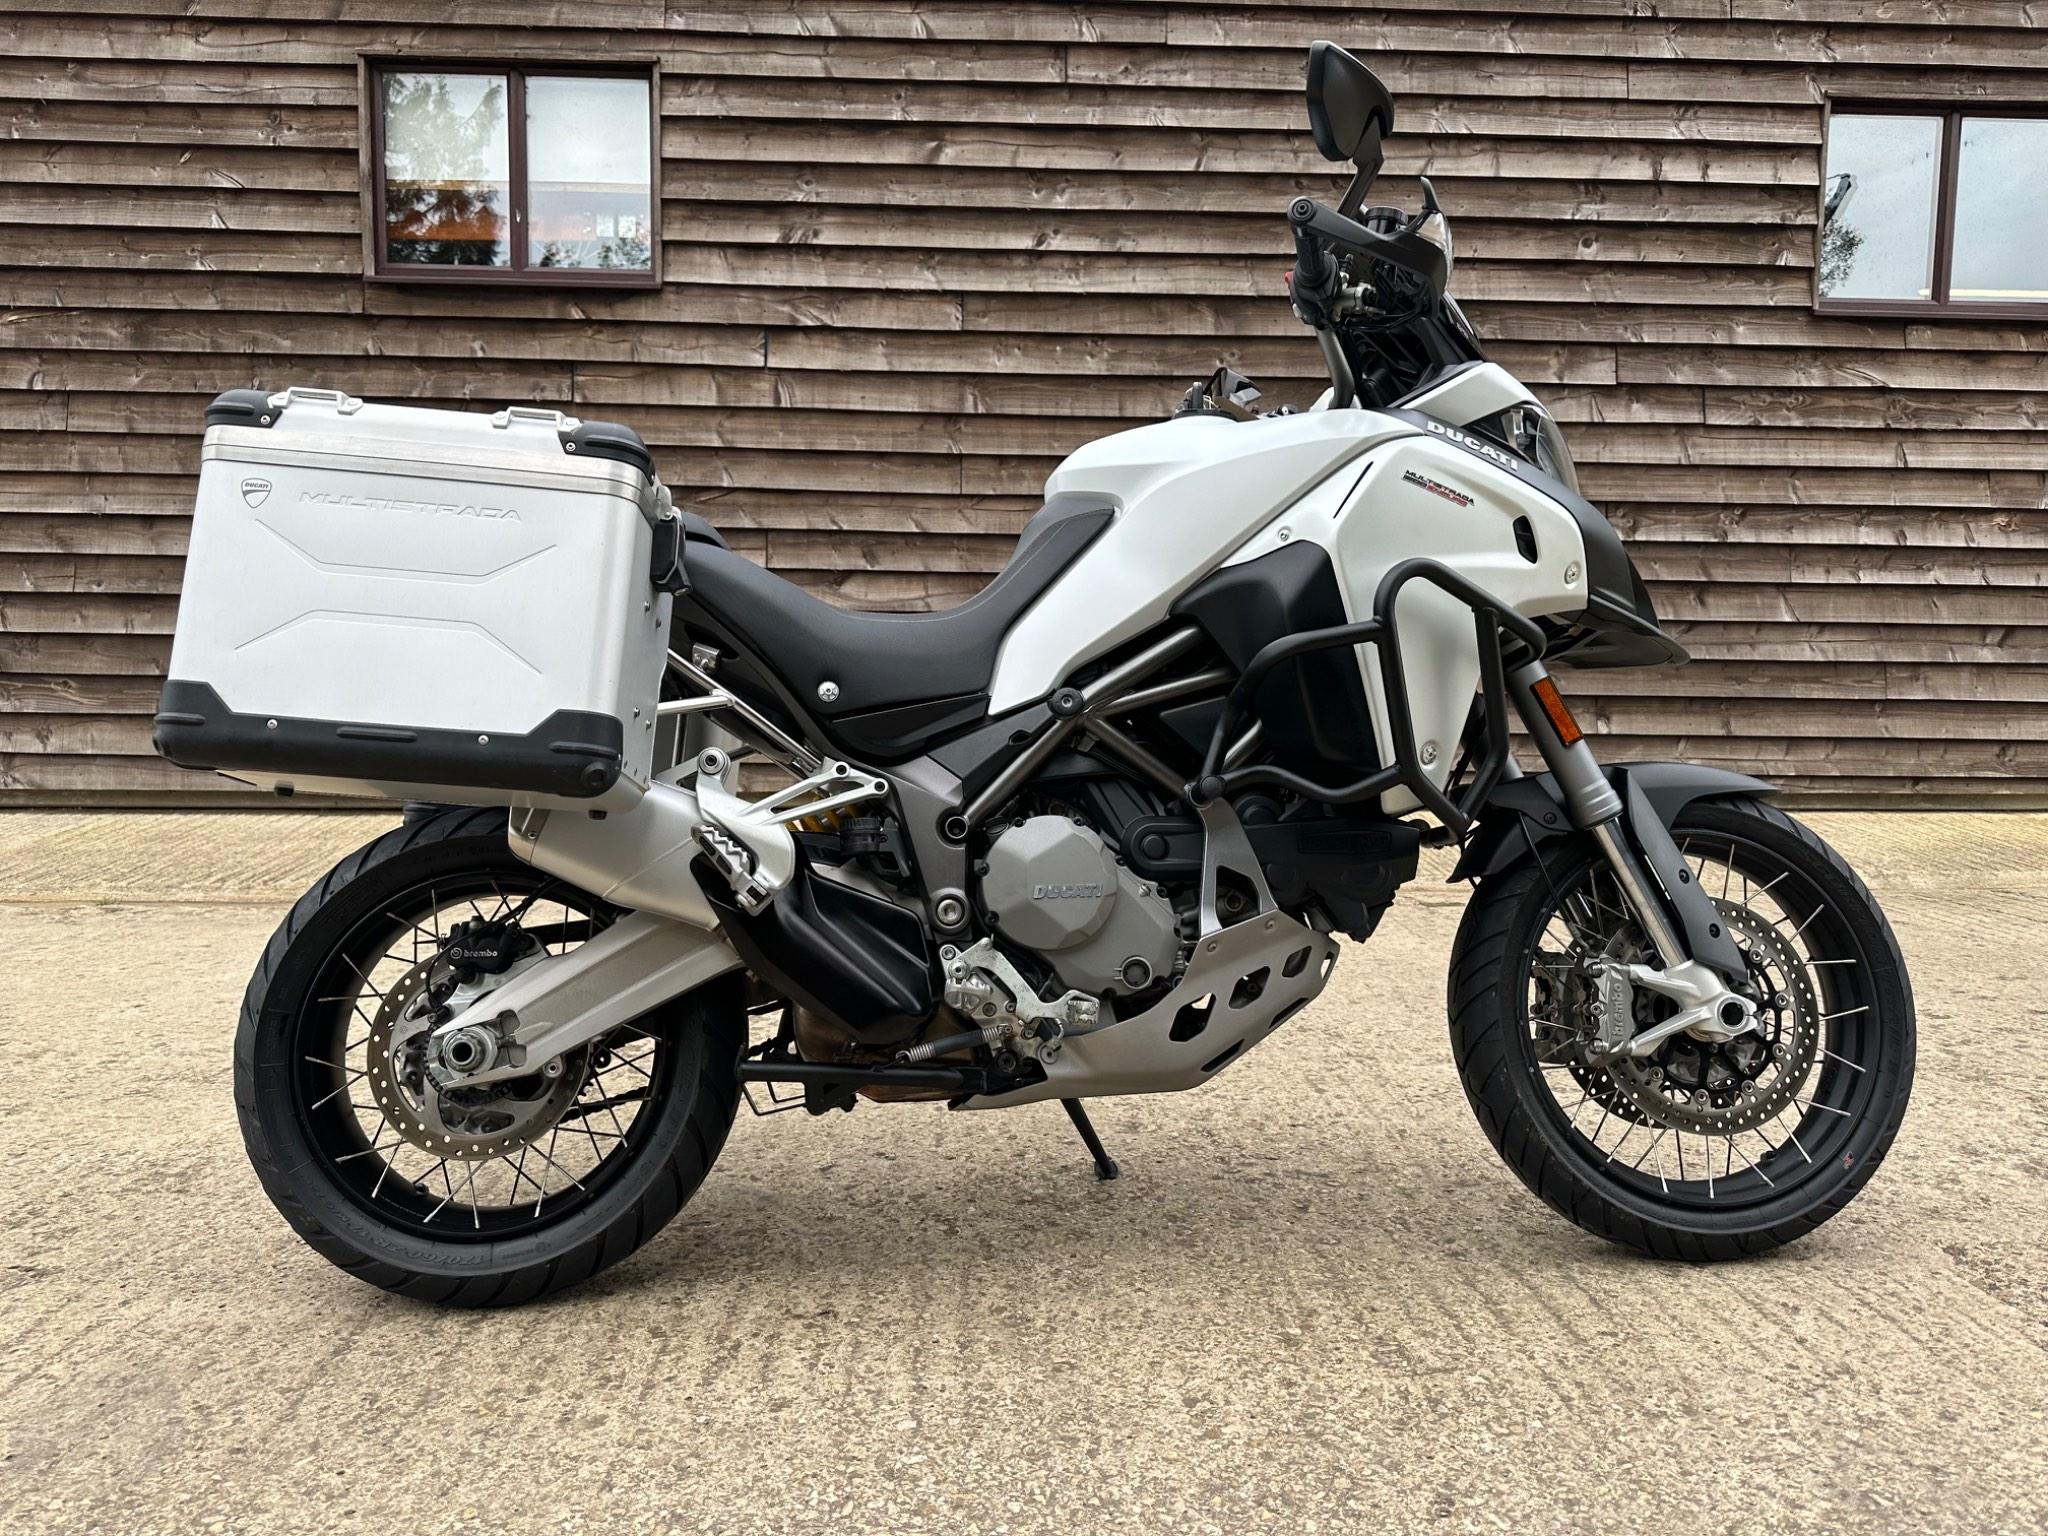 2018 Ducati Multistrada 1200 1200 Enduro ABS (Grey or White Color) From £213.25 per month 